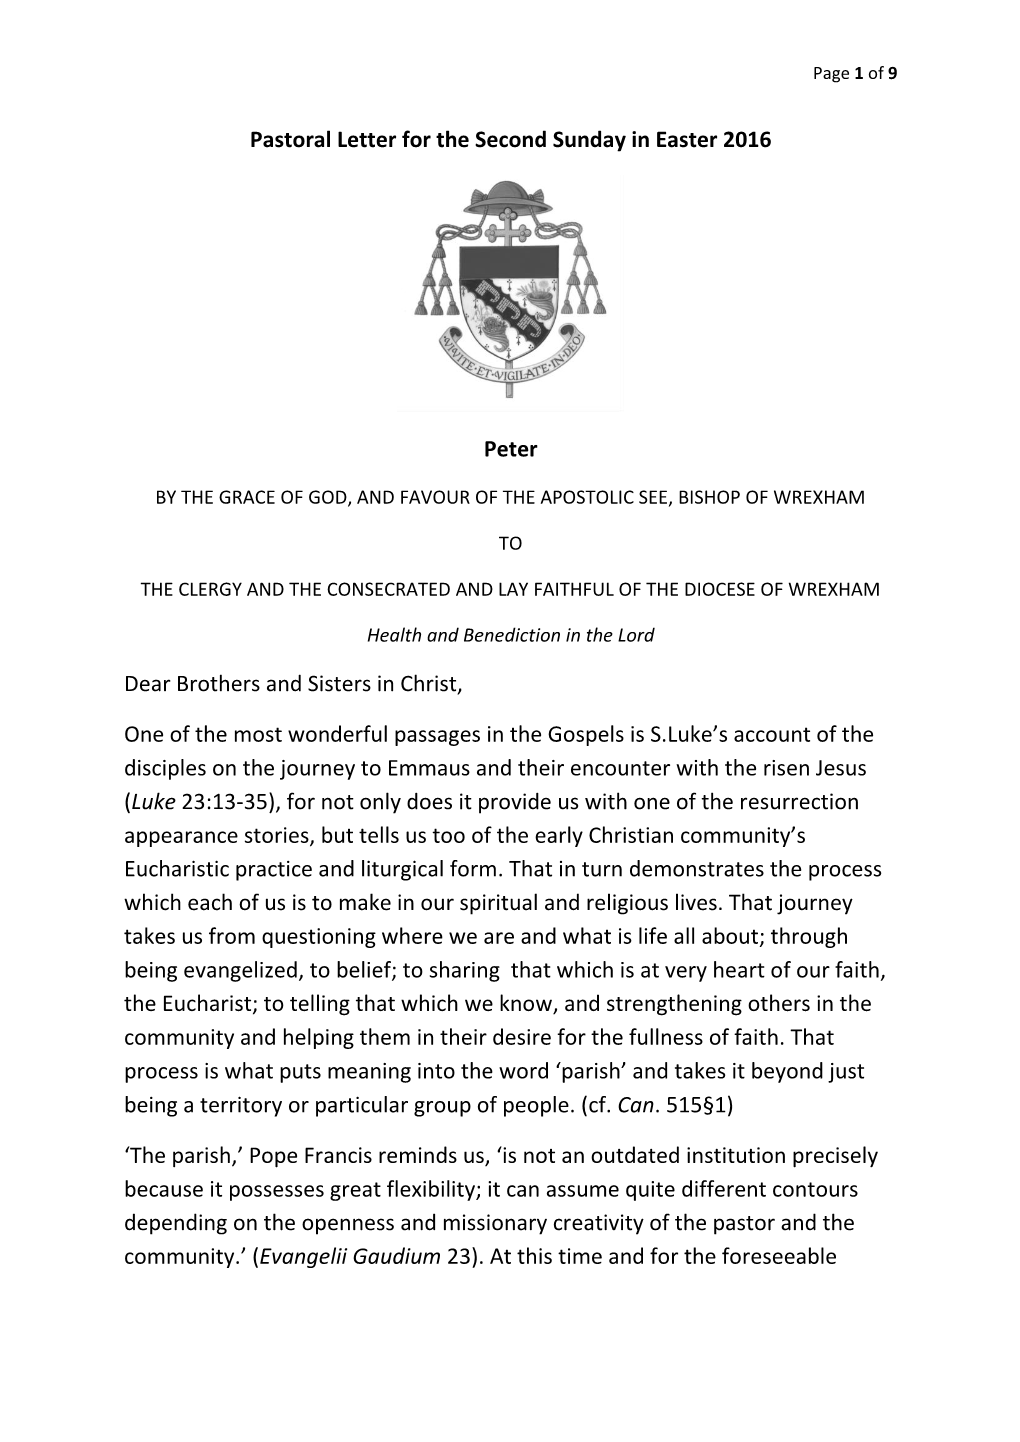 Pastoral Letter for the Second Sunday in Easter 2016